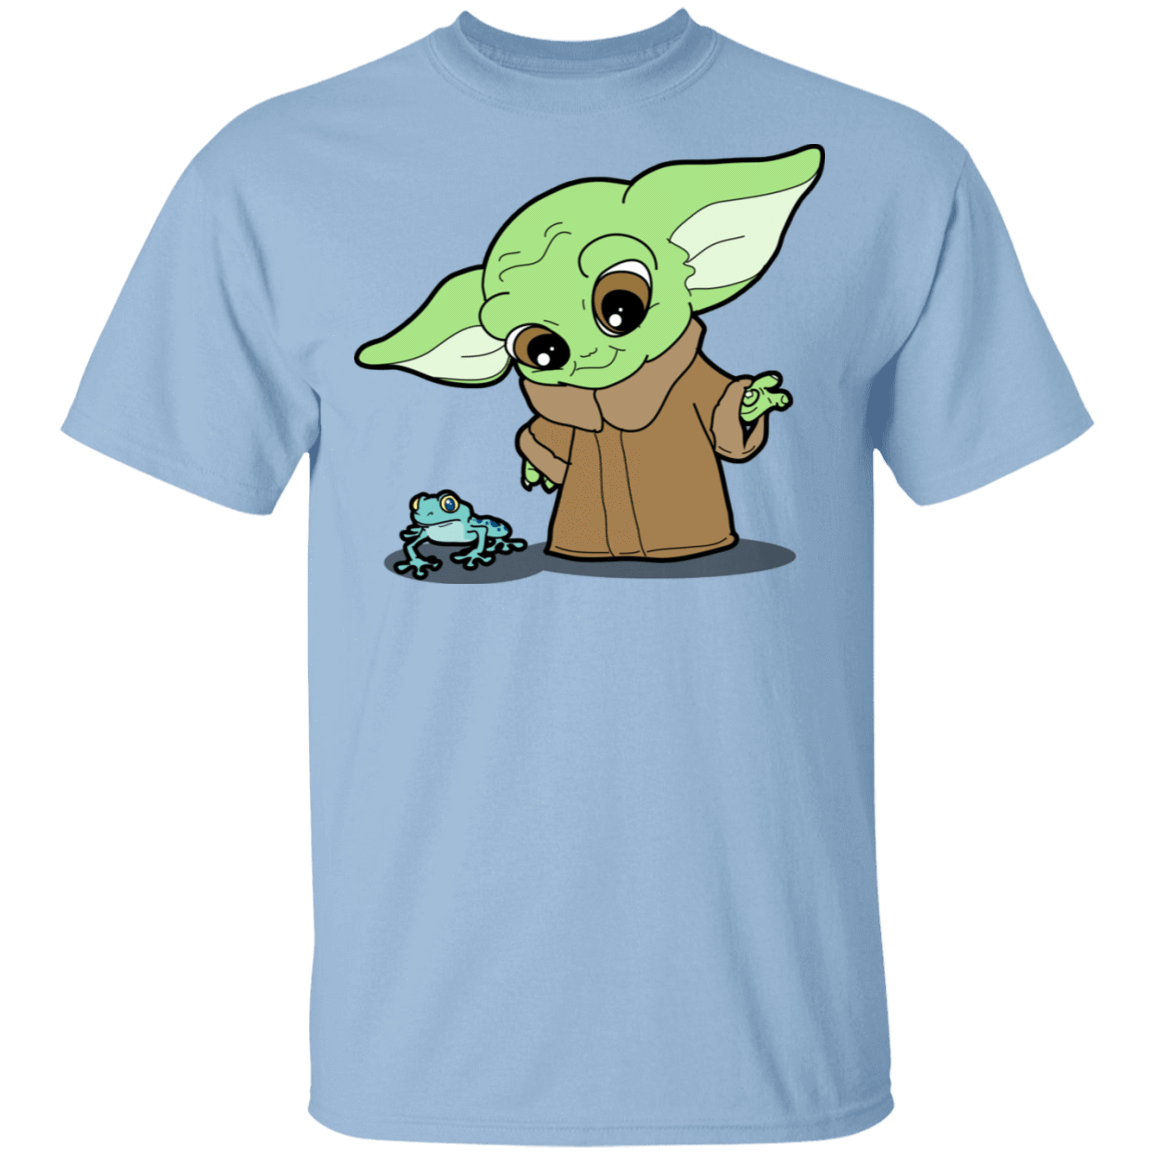 T-Shirts Light Blue / S Baby Yoda and Frog T-Shirt